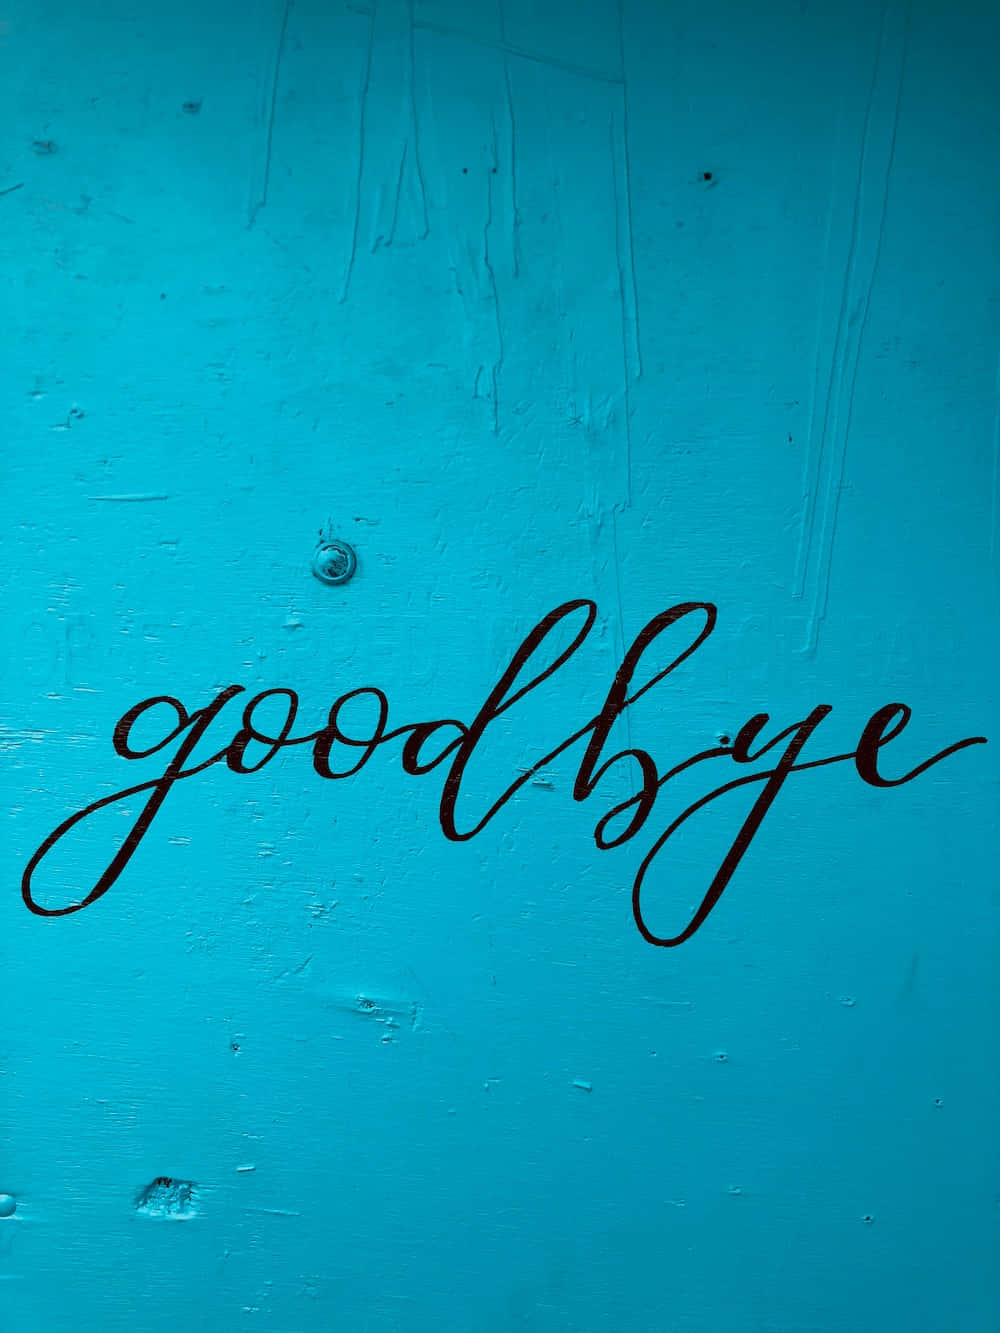 A Blue Wall With The Word Goodbye Written On It